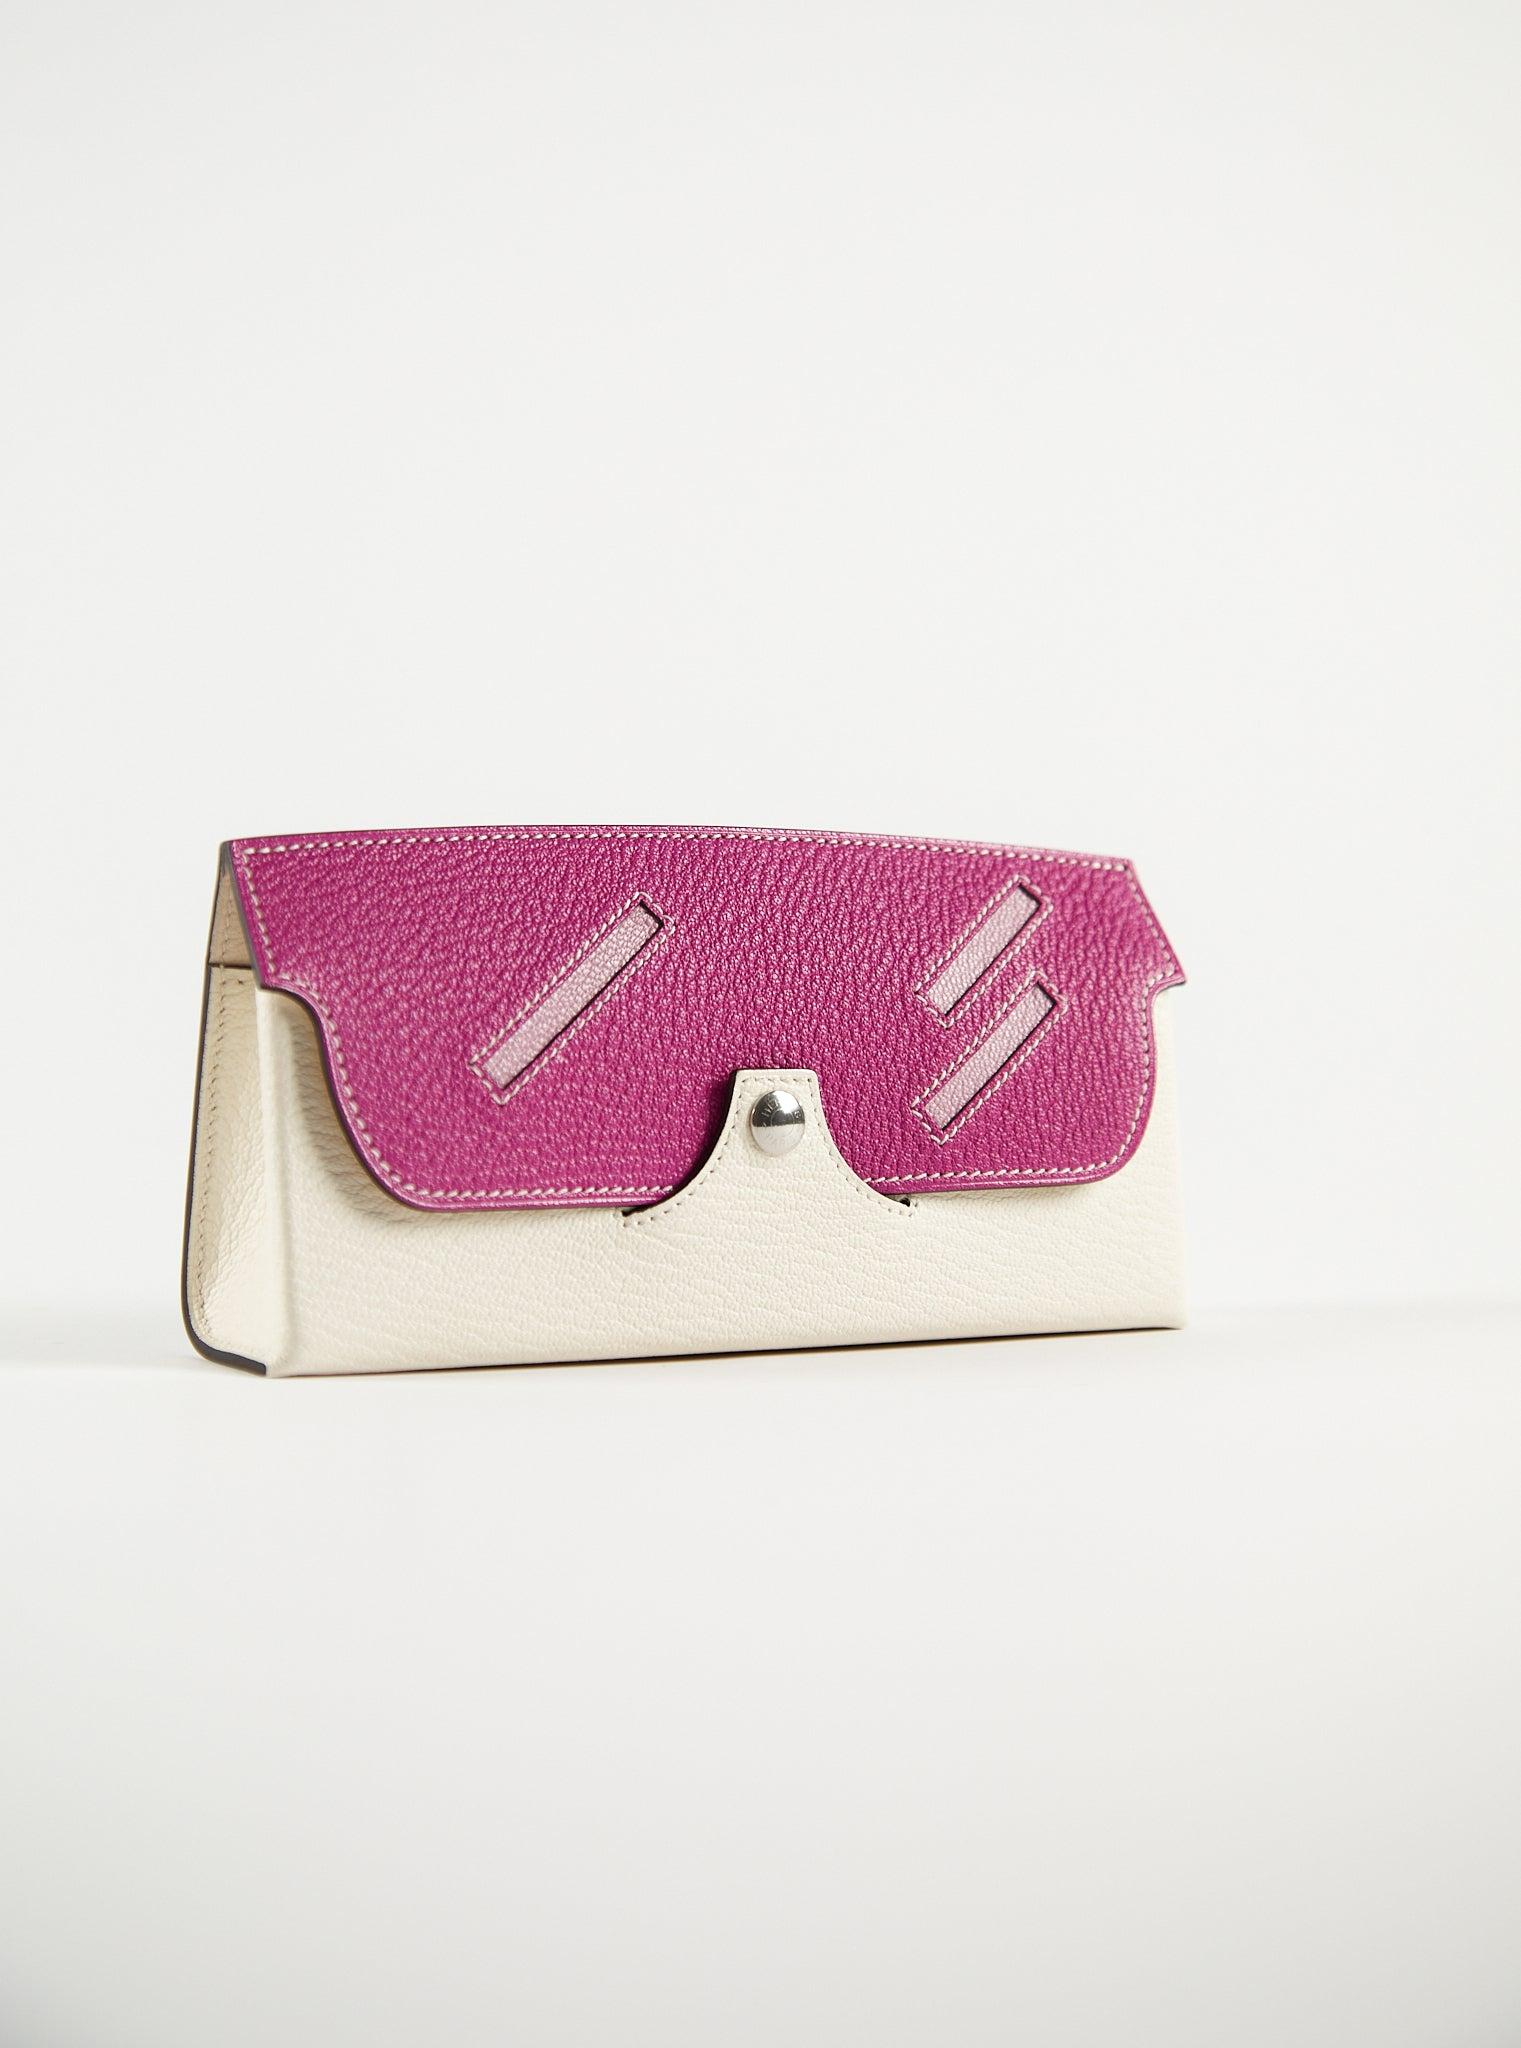 Hermès In the Loop Wink Glasses Case in Nata & Fuchsia

Chevre Mysore Leather with Palladium Plated Snap Closure 

Removable lanyard

Accompanied by: Hermès Box & Ribbon 

Dimensions: L 7.1